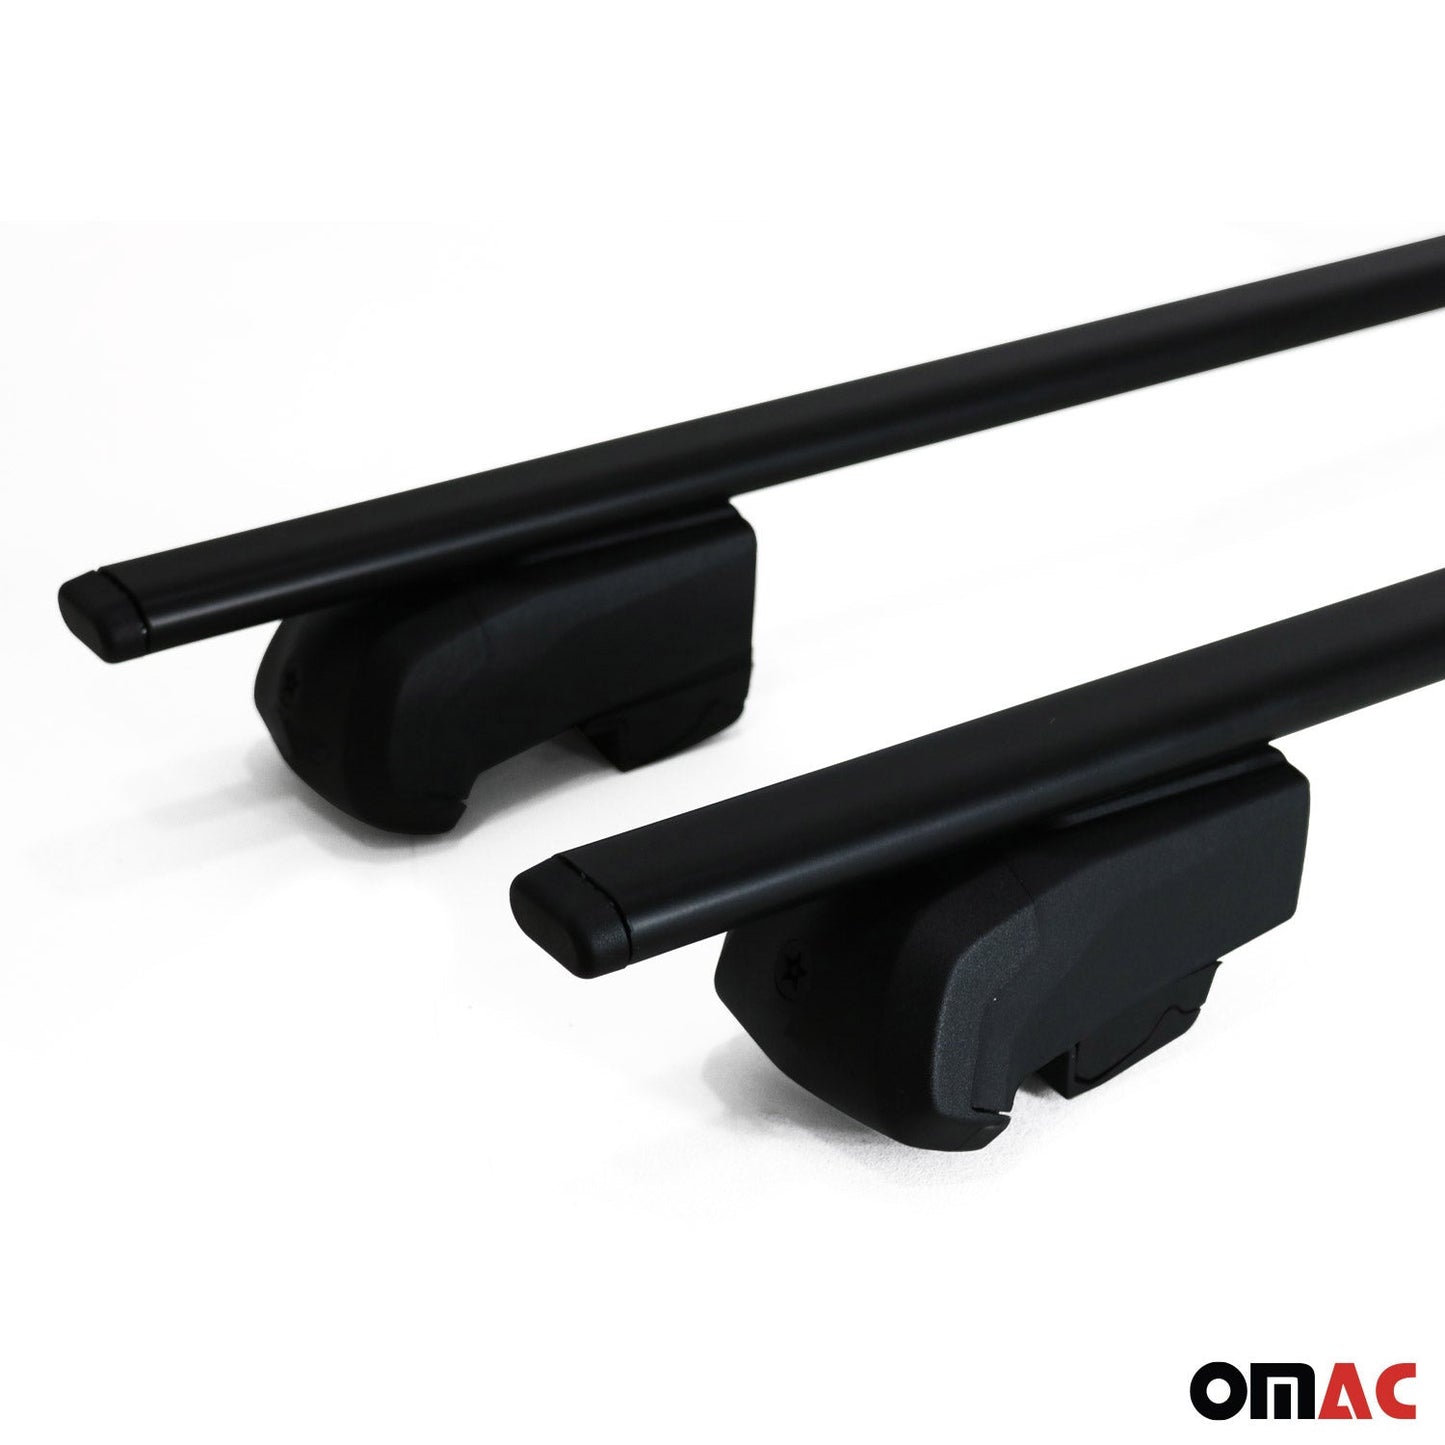 OMAC Roof Racks Luggage Carrier Cross Bars Iron for Lincoln MKX 2016-2018 Black 2Pcs G003055